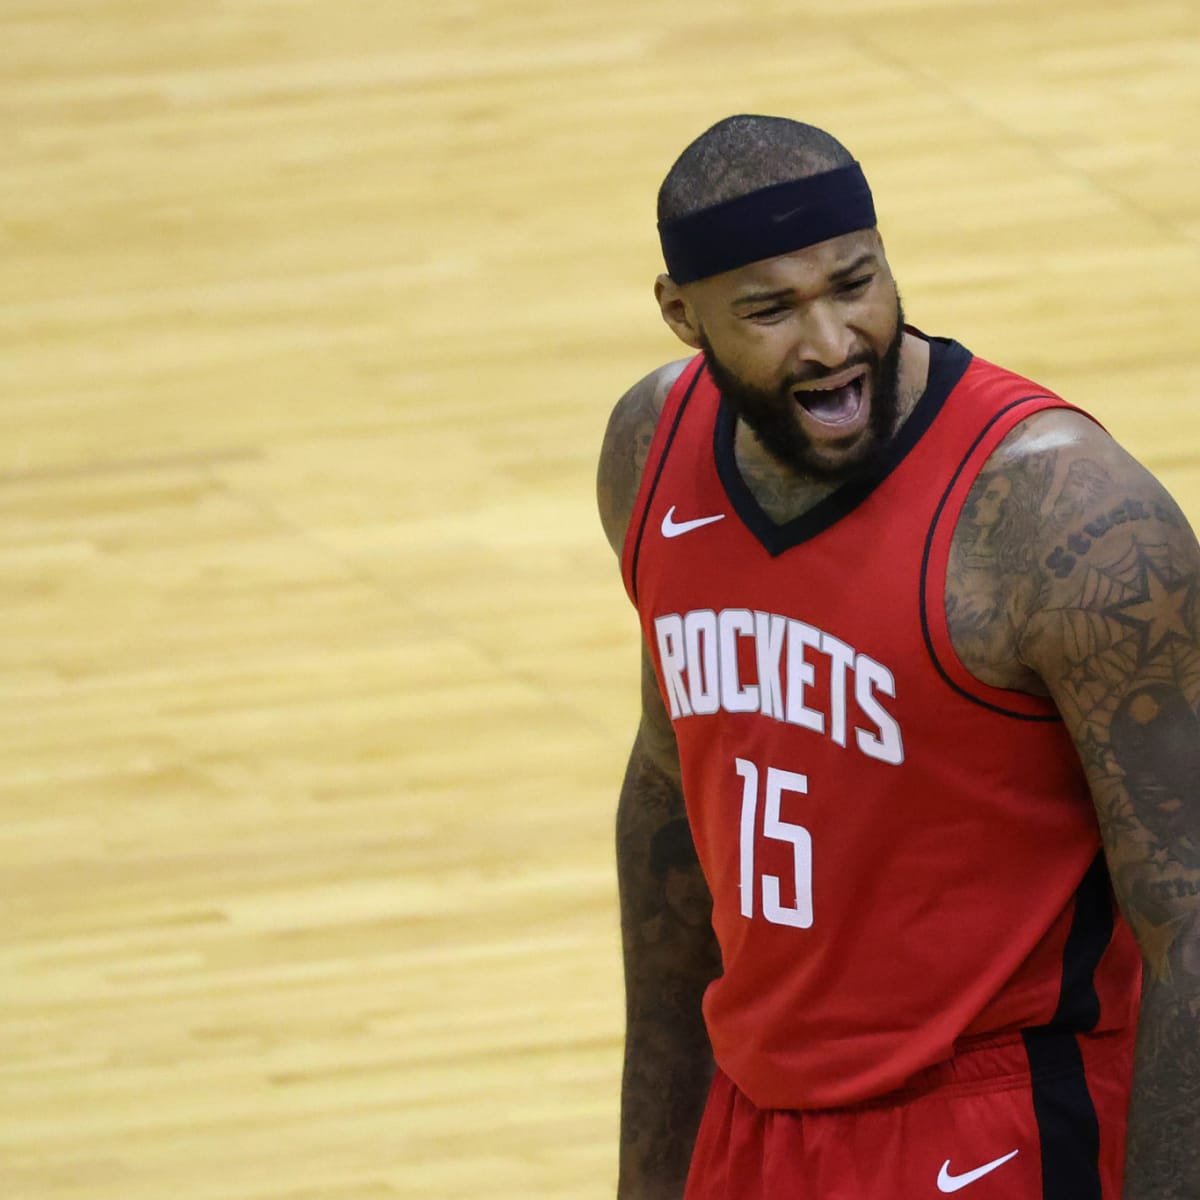 If you aren't rooting for DeMarcus Cousins, you should be